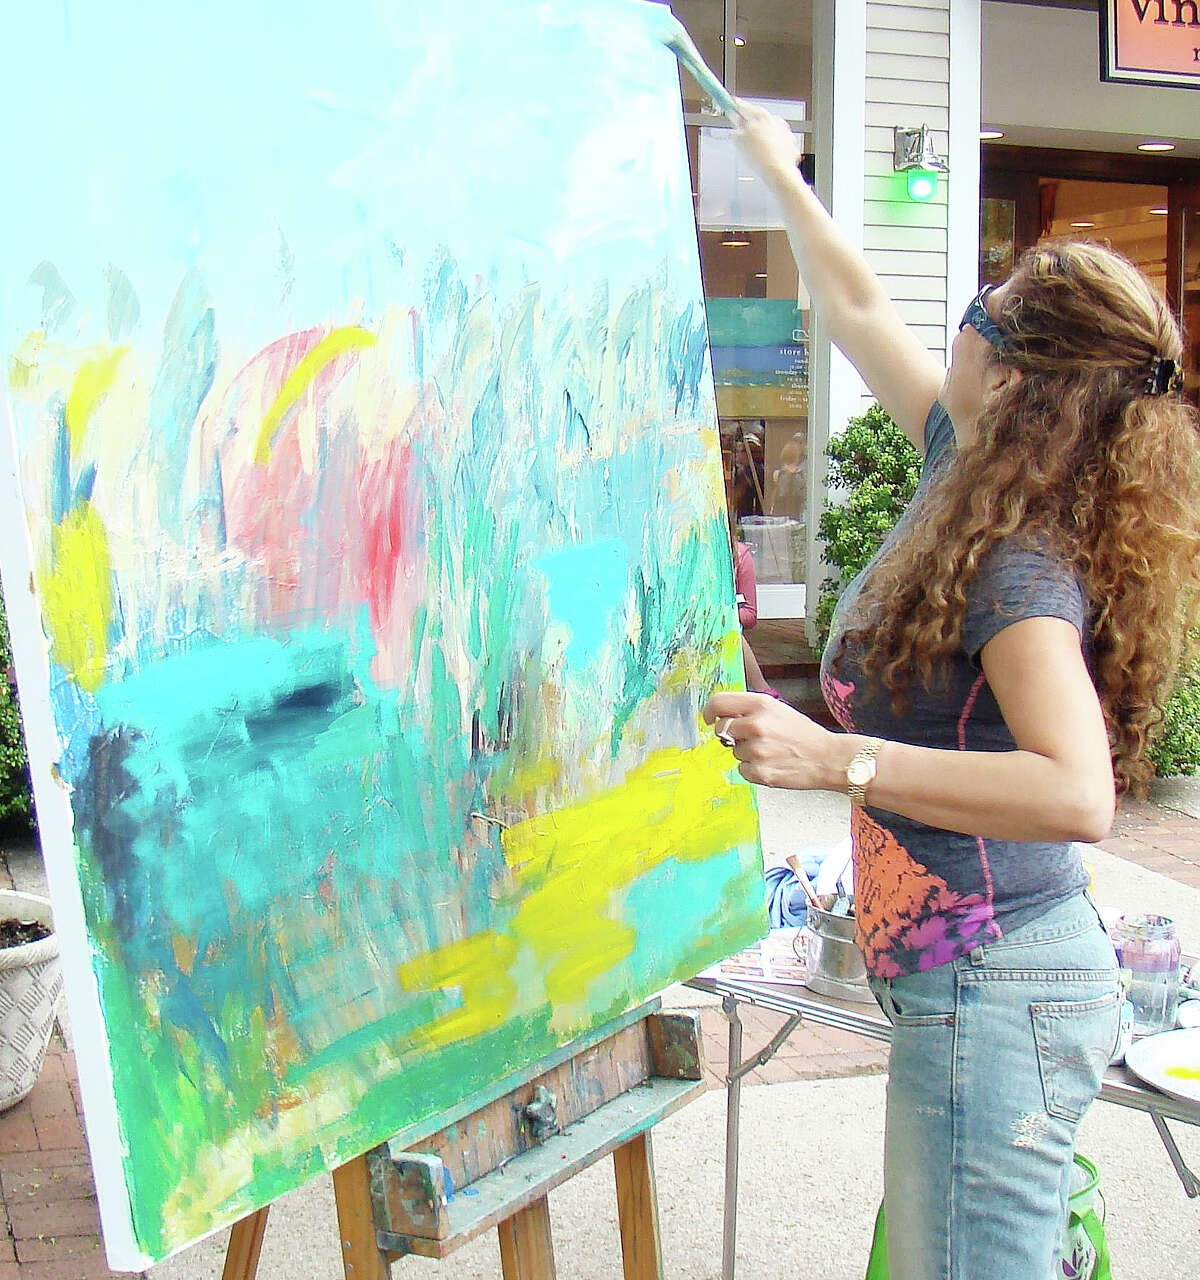 Local artist Sholeh Janati demonstrated her painting technique at a previous Art About Town opening night street party. Artists, musicians, dancers and street performers will line Main Street for the event May 21 from 5:30-8:30 p.m.